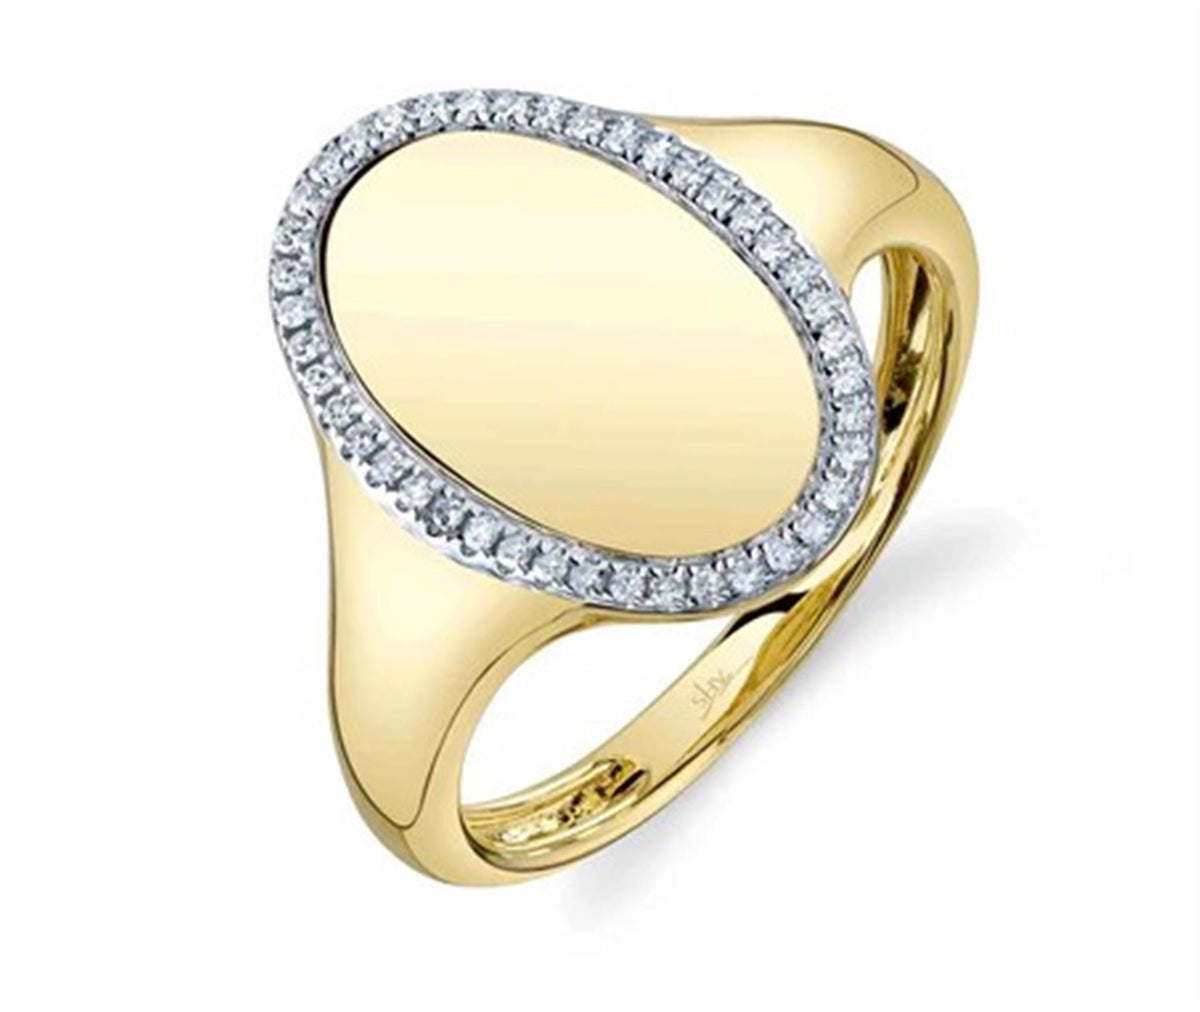 14Kt Yellow Gold Engraveable Oval Signet Ring With .11cttw Natural Diamonds